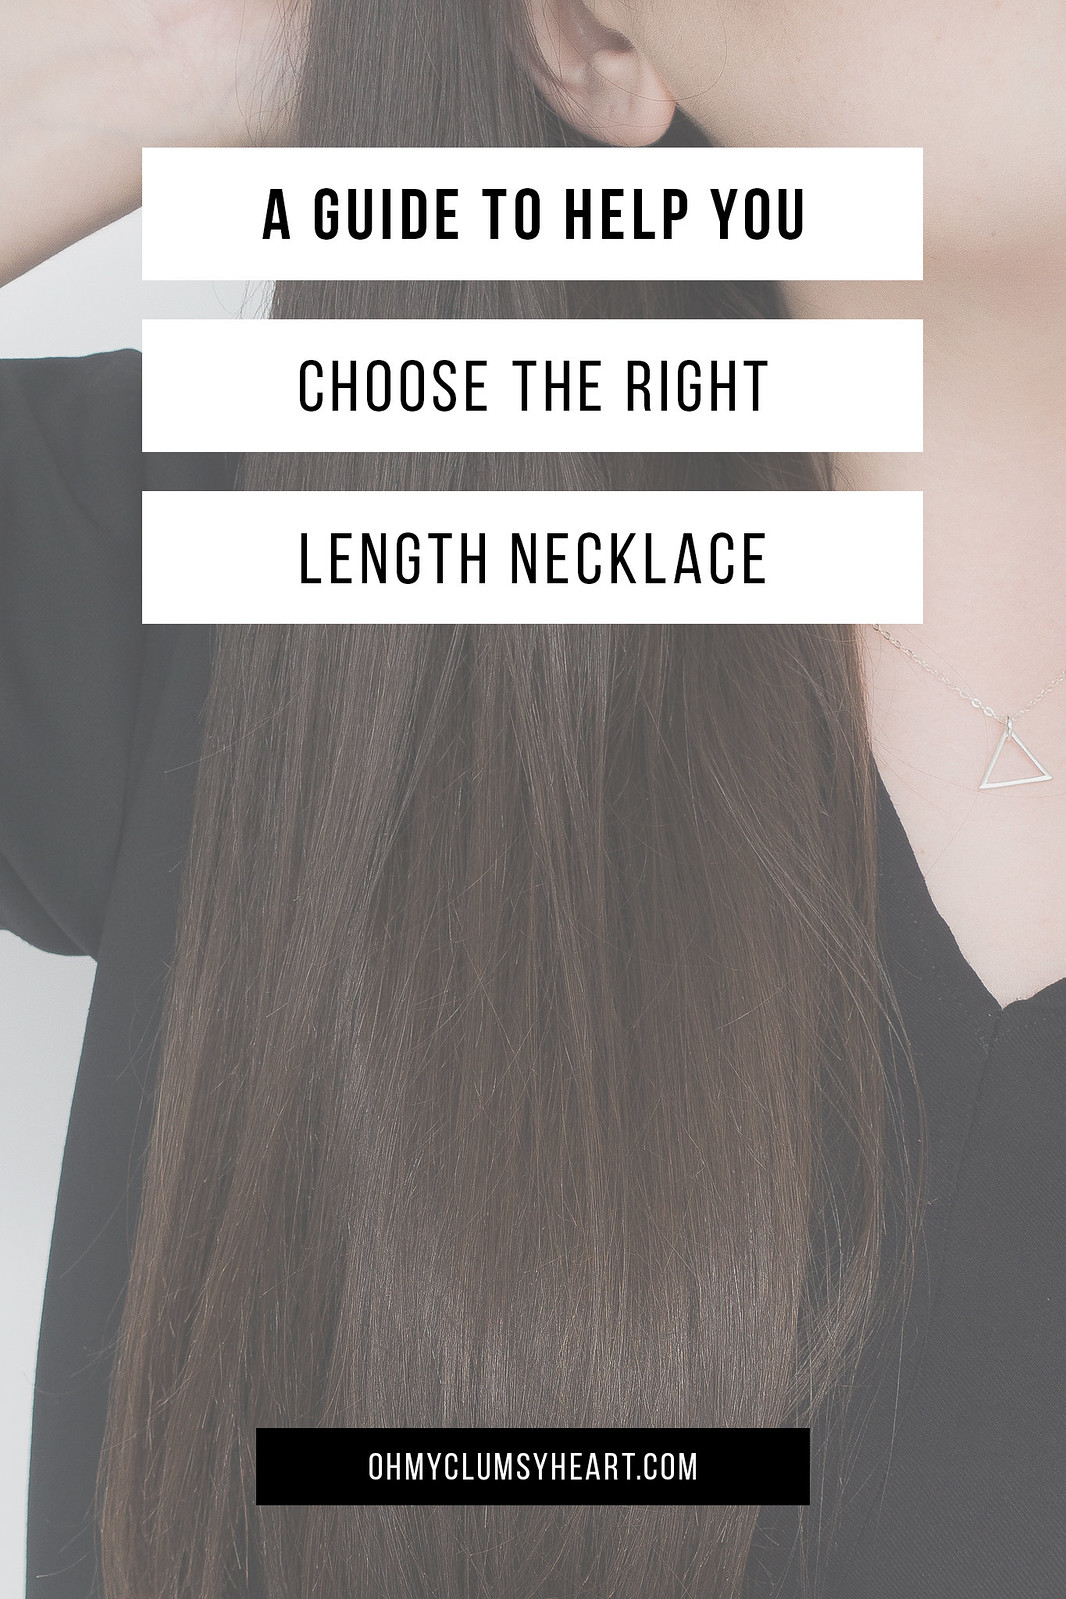 How to Choose the Right Necklace Length